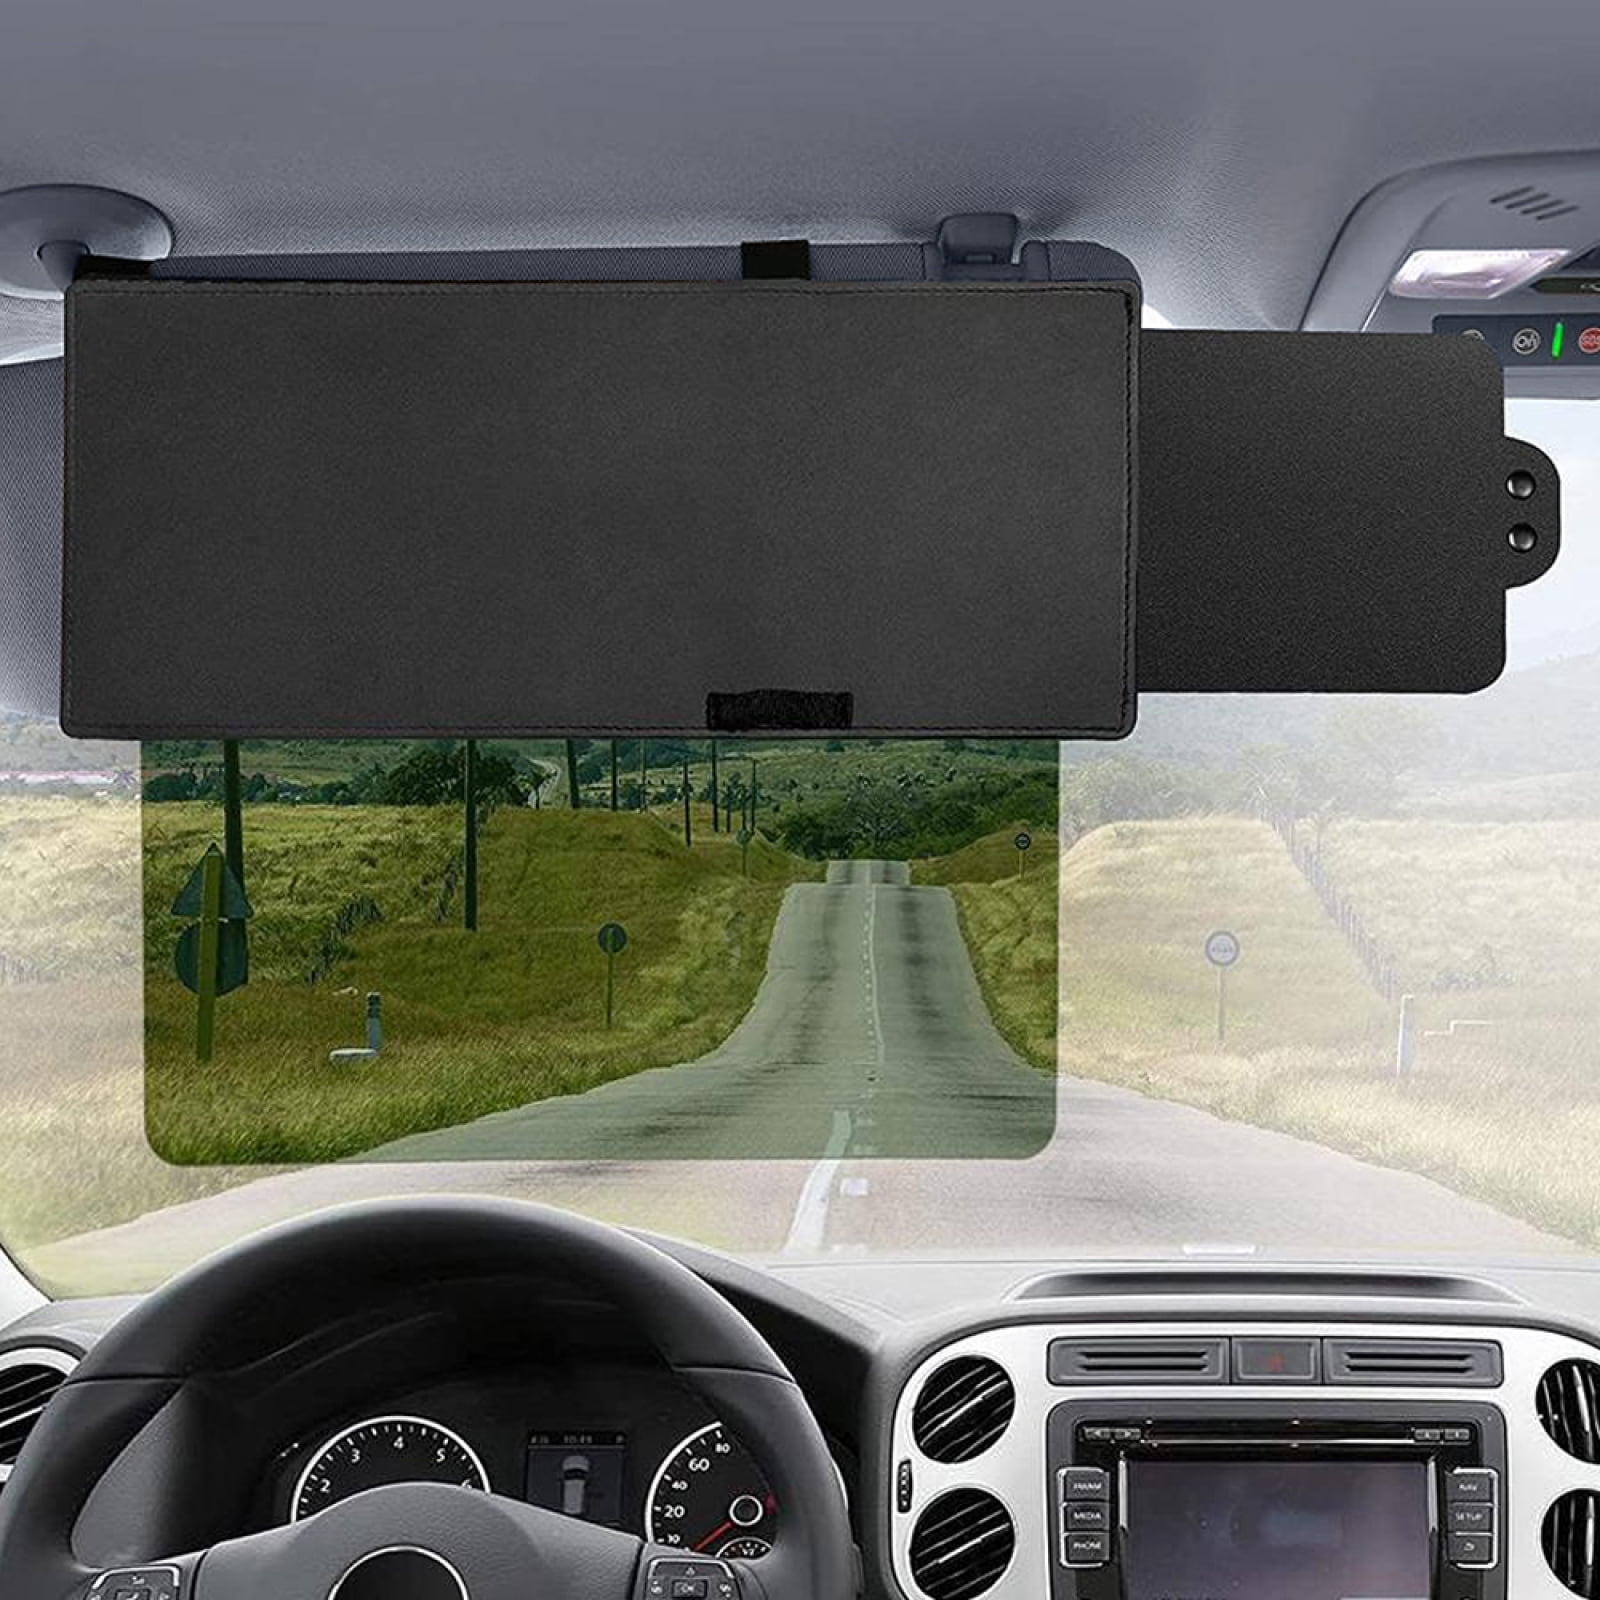 Trobo Sun Visor Extender, Curved Polarized See-Through Visor Extension for Car  Windshield with A 360 Rotation Head, Clip-On Adjustable Anti-Glare Sun  Blocker Protects from UV Rays & Snow Blindness 